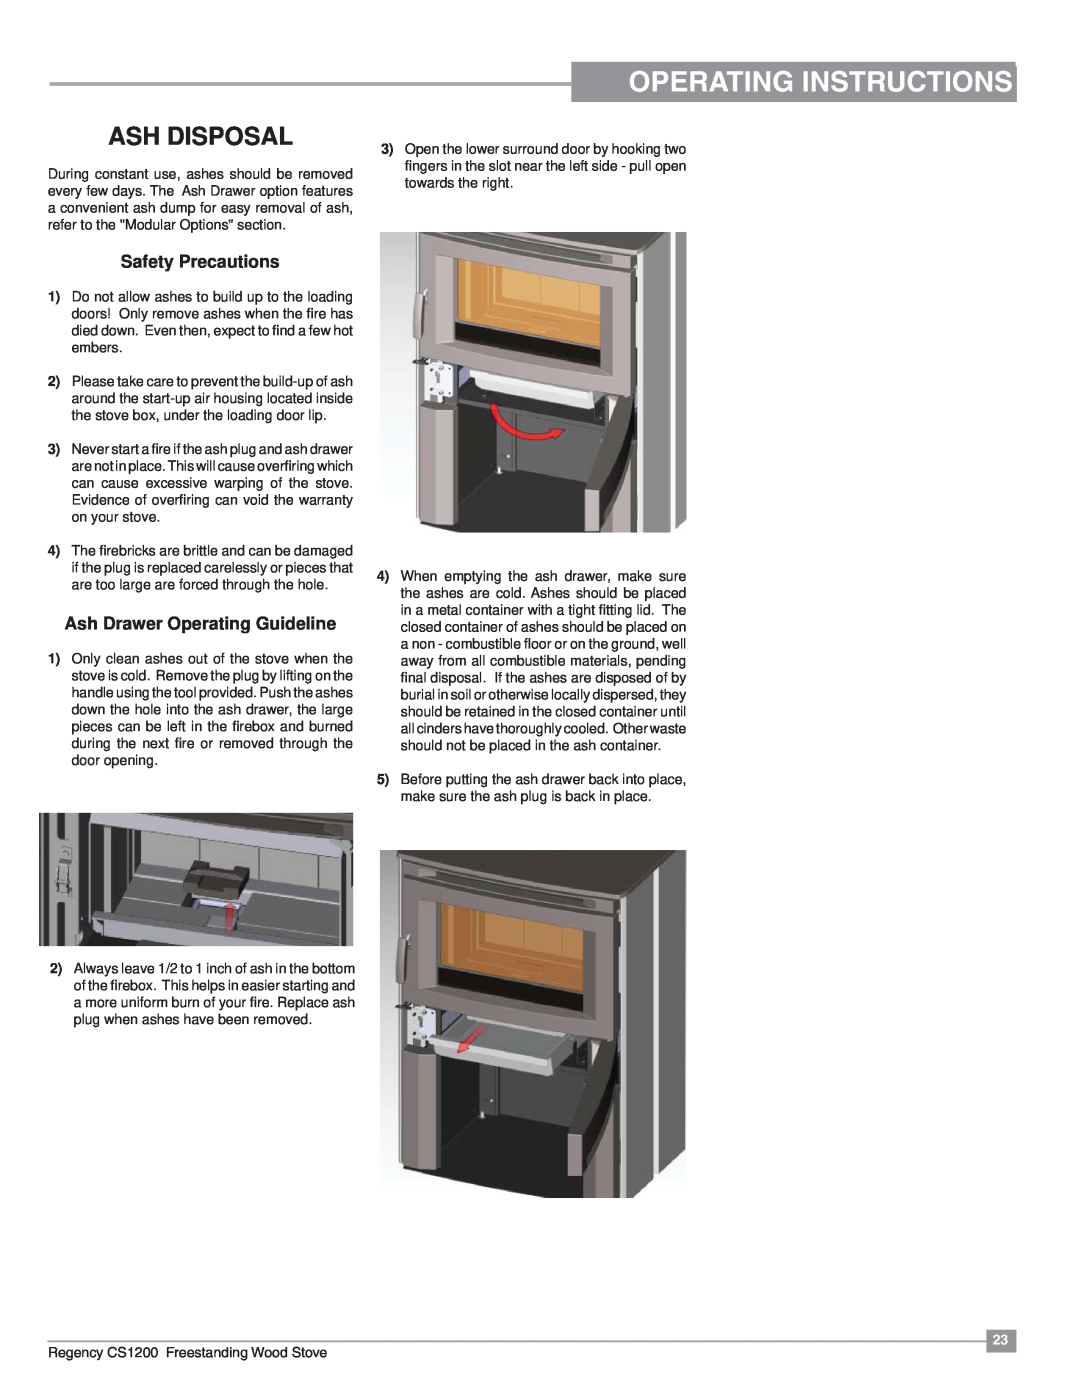 Regency CS1200 installation manual Operating Instructions, Ash Disposal, Safety Precautions, Ash Drawer Operating Guideline 